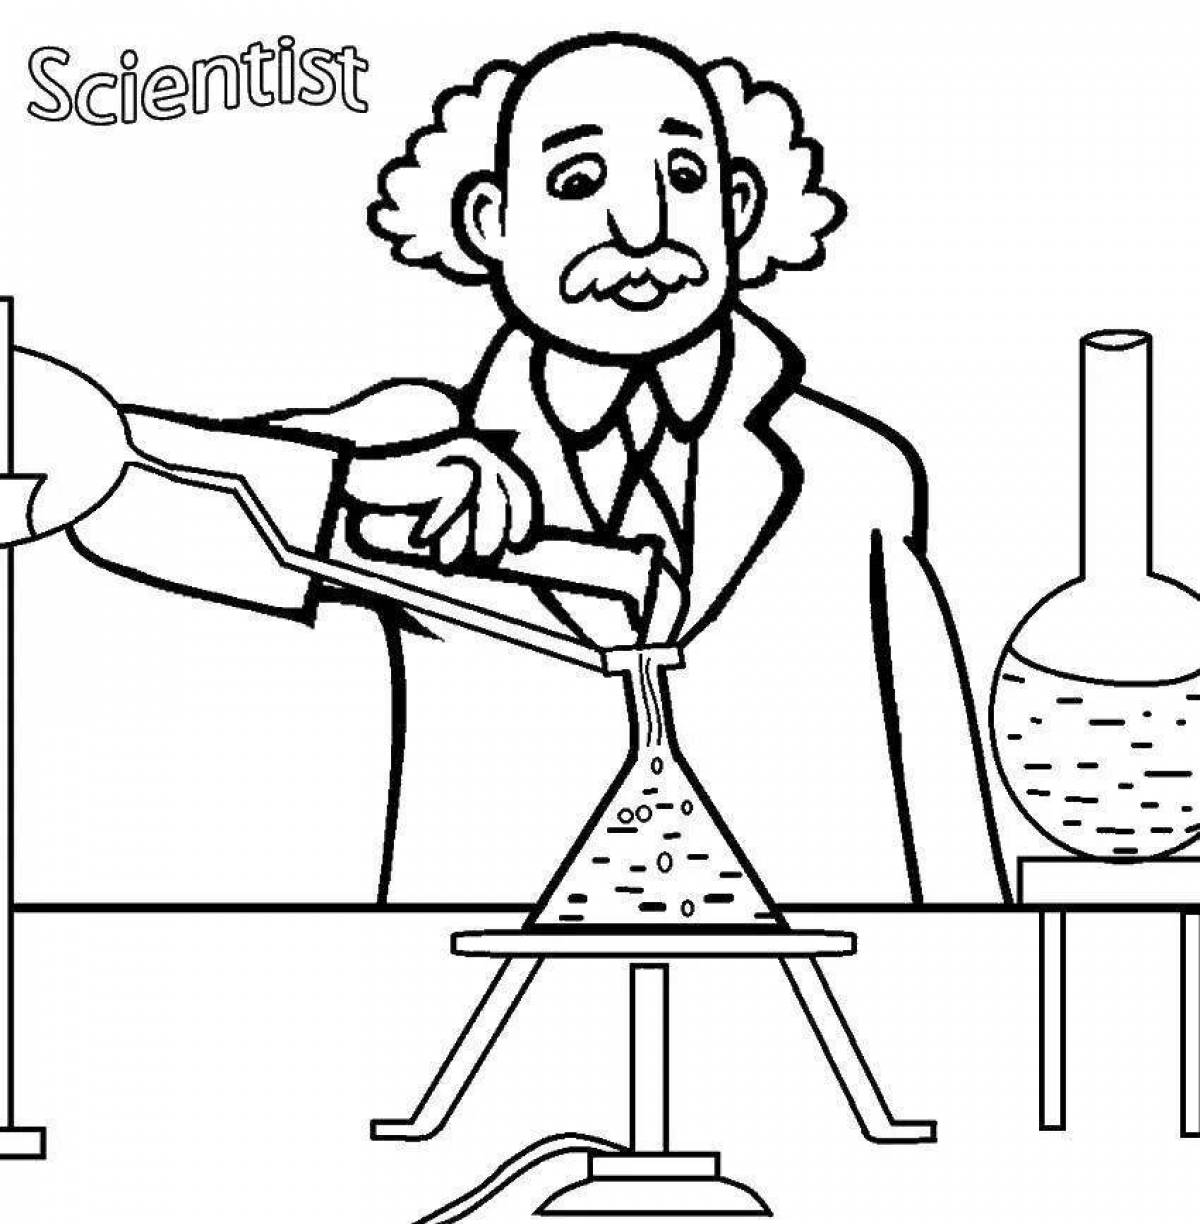 Science and technology fun coloring book